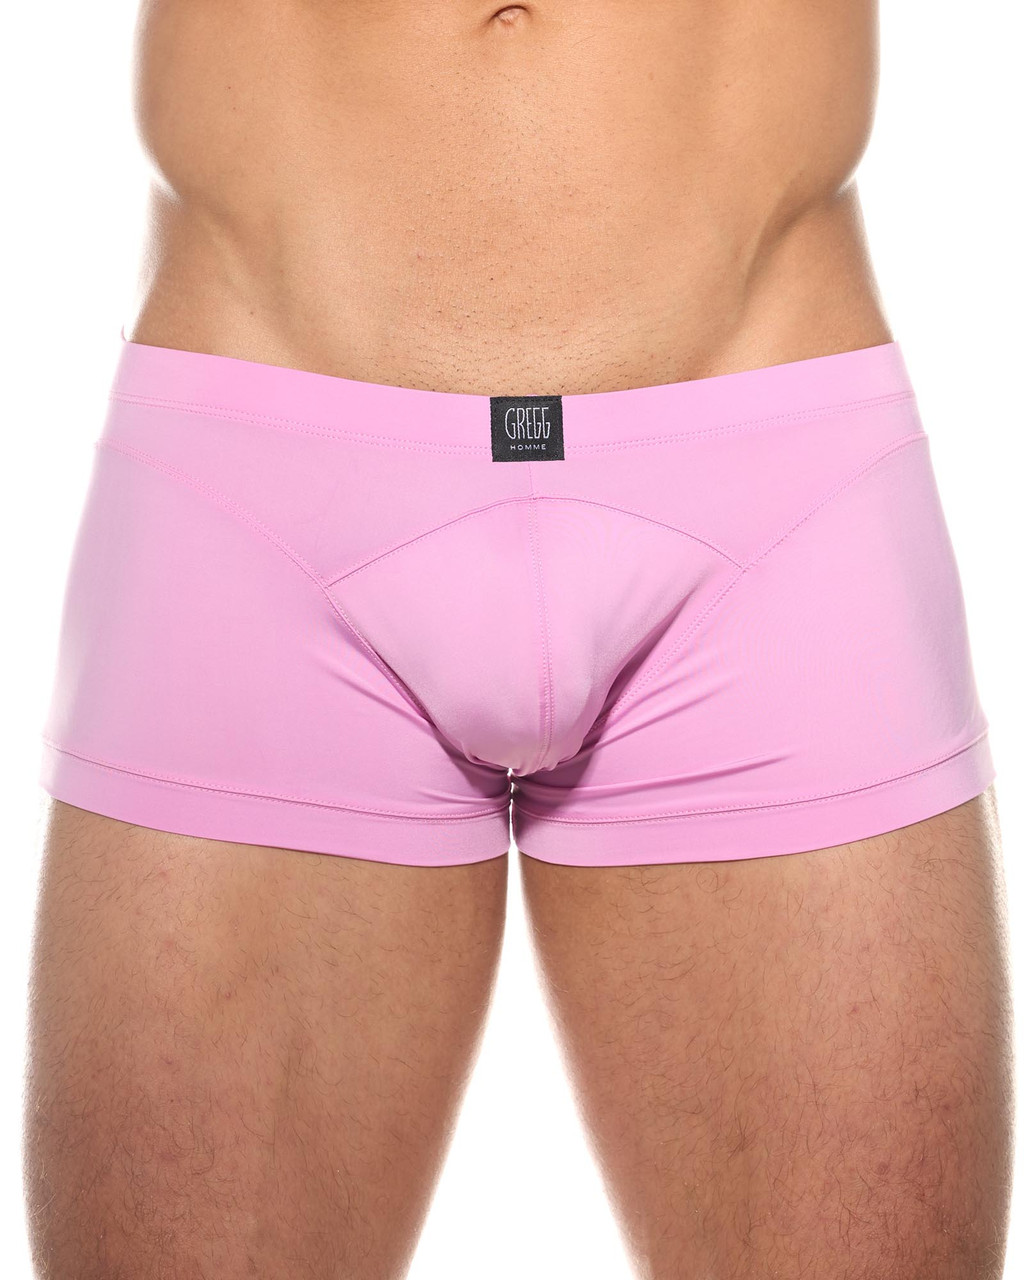 https://cdn11.bigcommerce.com/s-6ehfk/images/stencil/1280x1280/products/11747/34120/Gregg-Homme-Wonder-Boxer-Brief-Pink-96105-PK-F1__76939.1679940342.jpg?c=2&imbypass=on